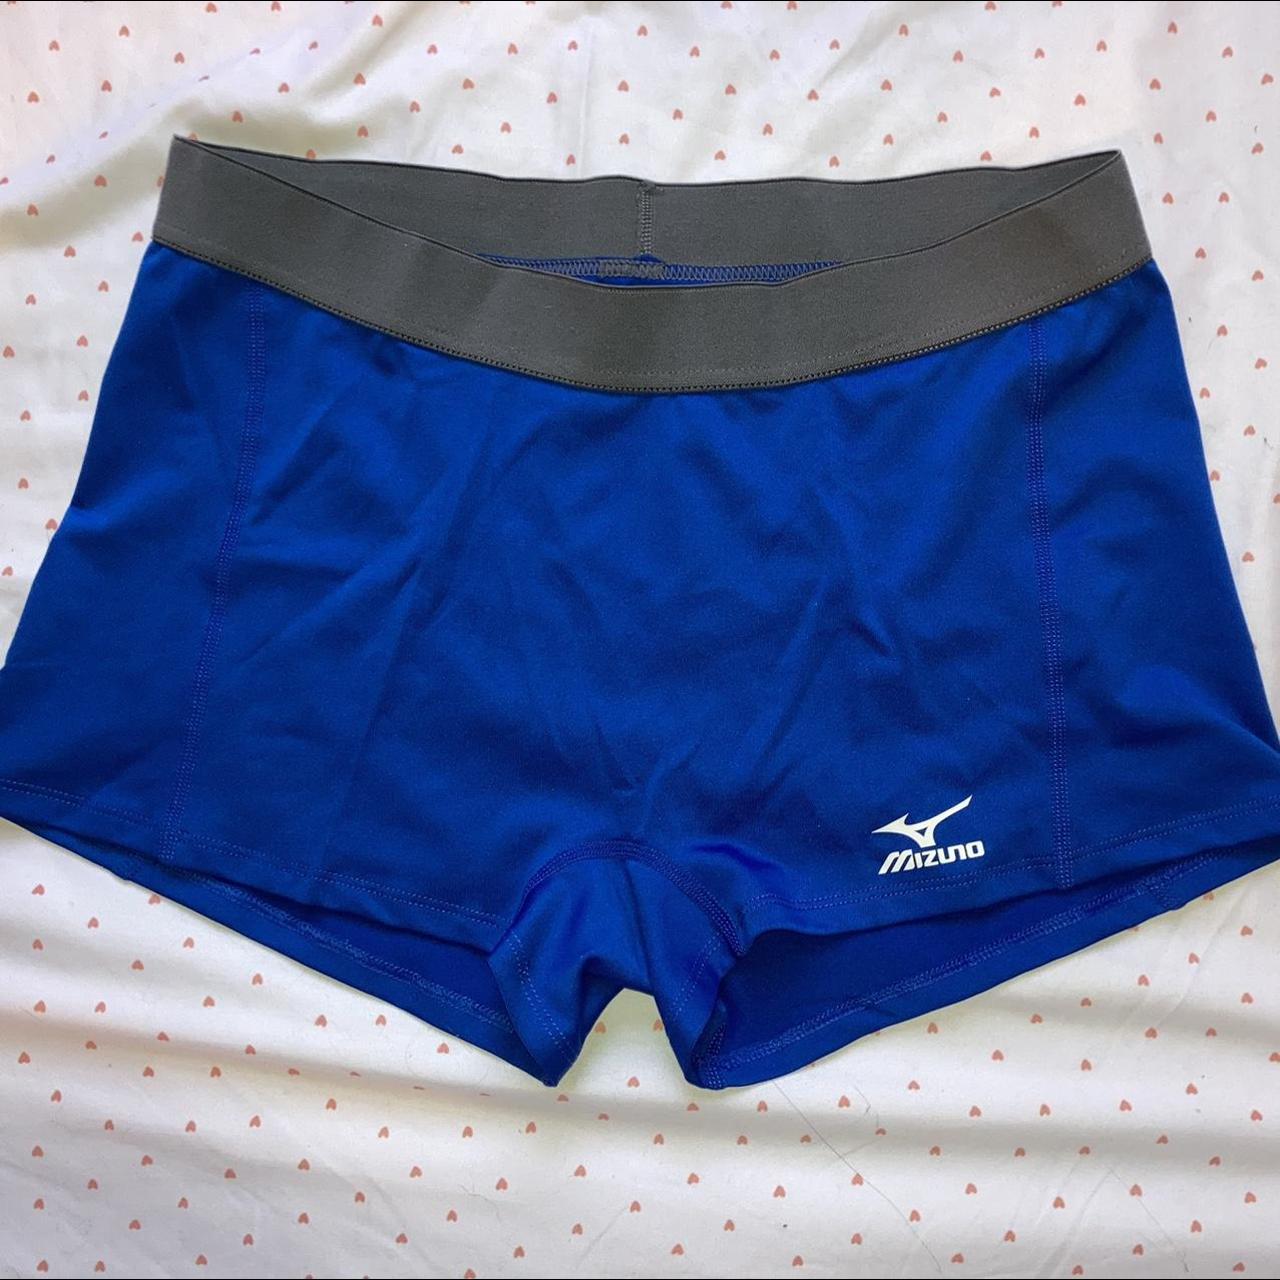 Mizuno spandex volleyball shorts. These have barely - Depop